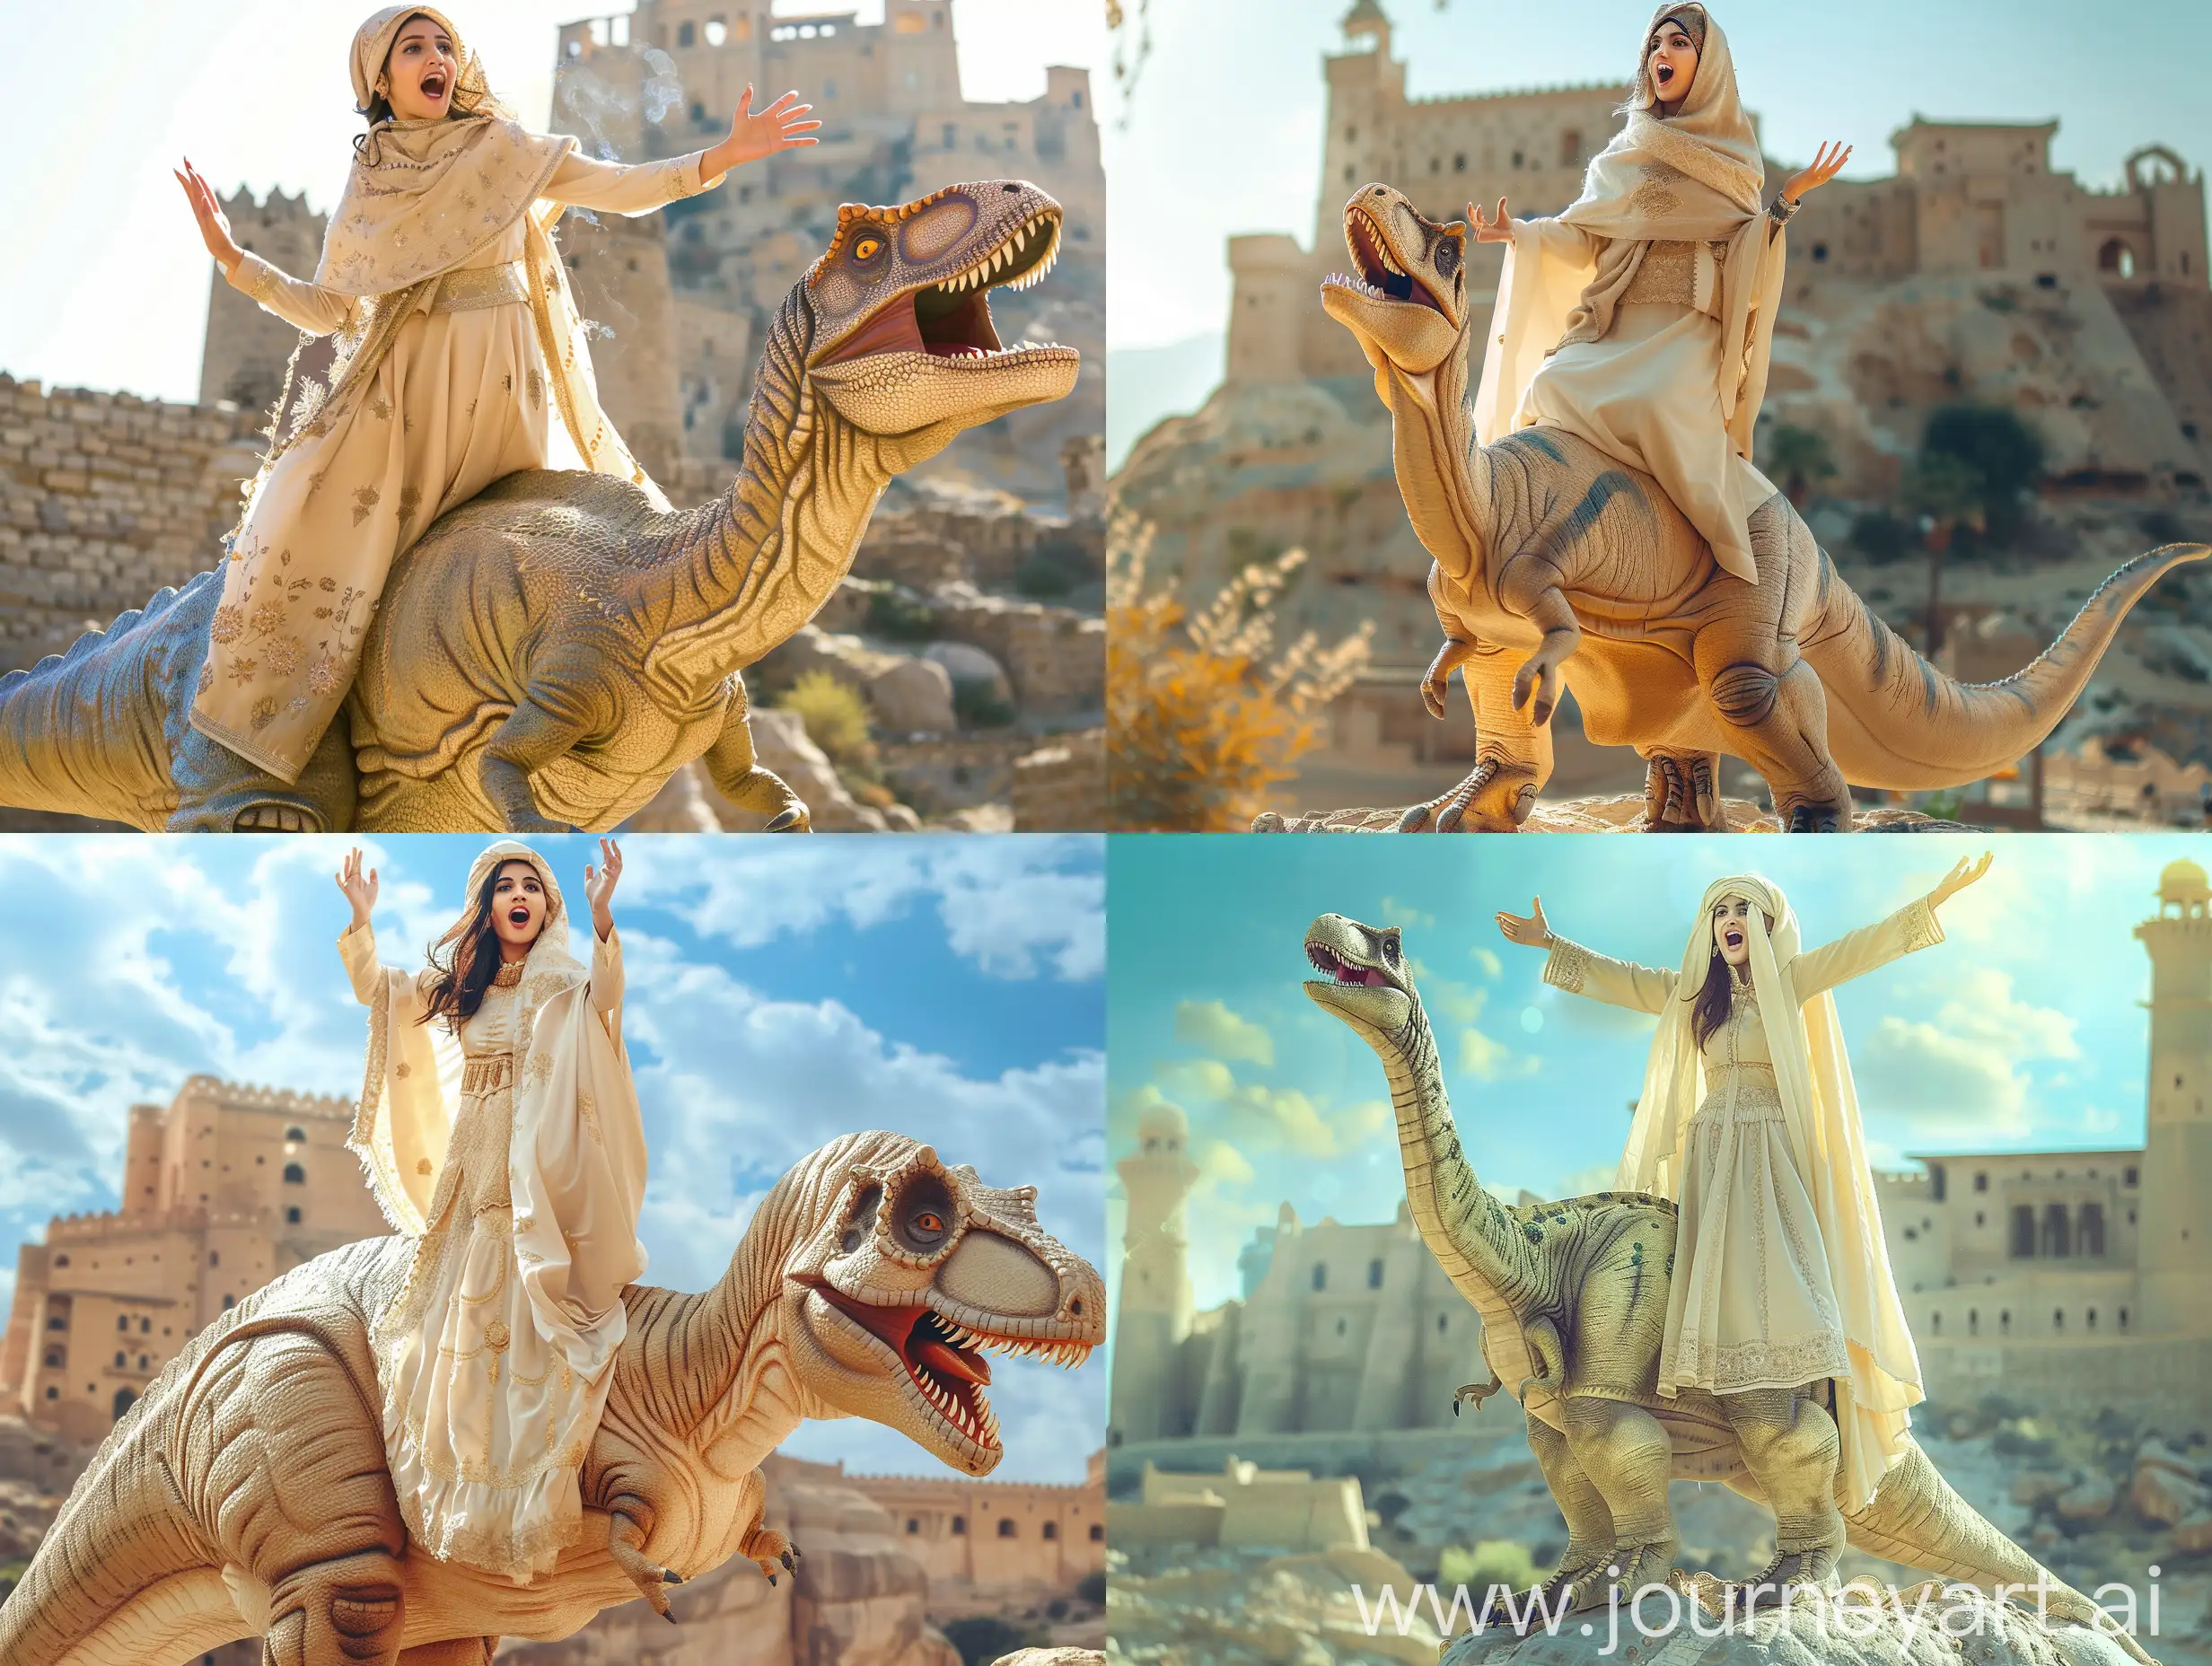 A beautiful young Persian woman in a traditional cream dress and a cream shawl on her head is standing on top of a plump dinosaur in front of the castle in the Bam citadel of the Persian Empire, shouting solemnly and calling the king of the city. Make me a real HD photo with fine details and sunny lighting, great quality Make me a real photo with fine details and midday light